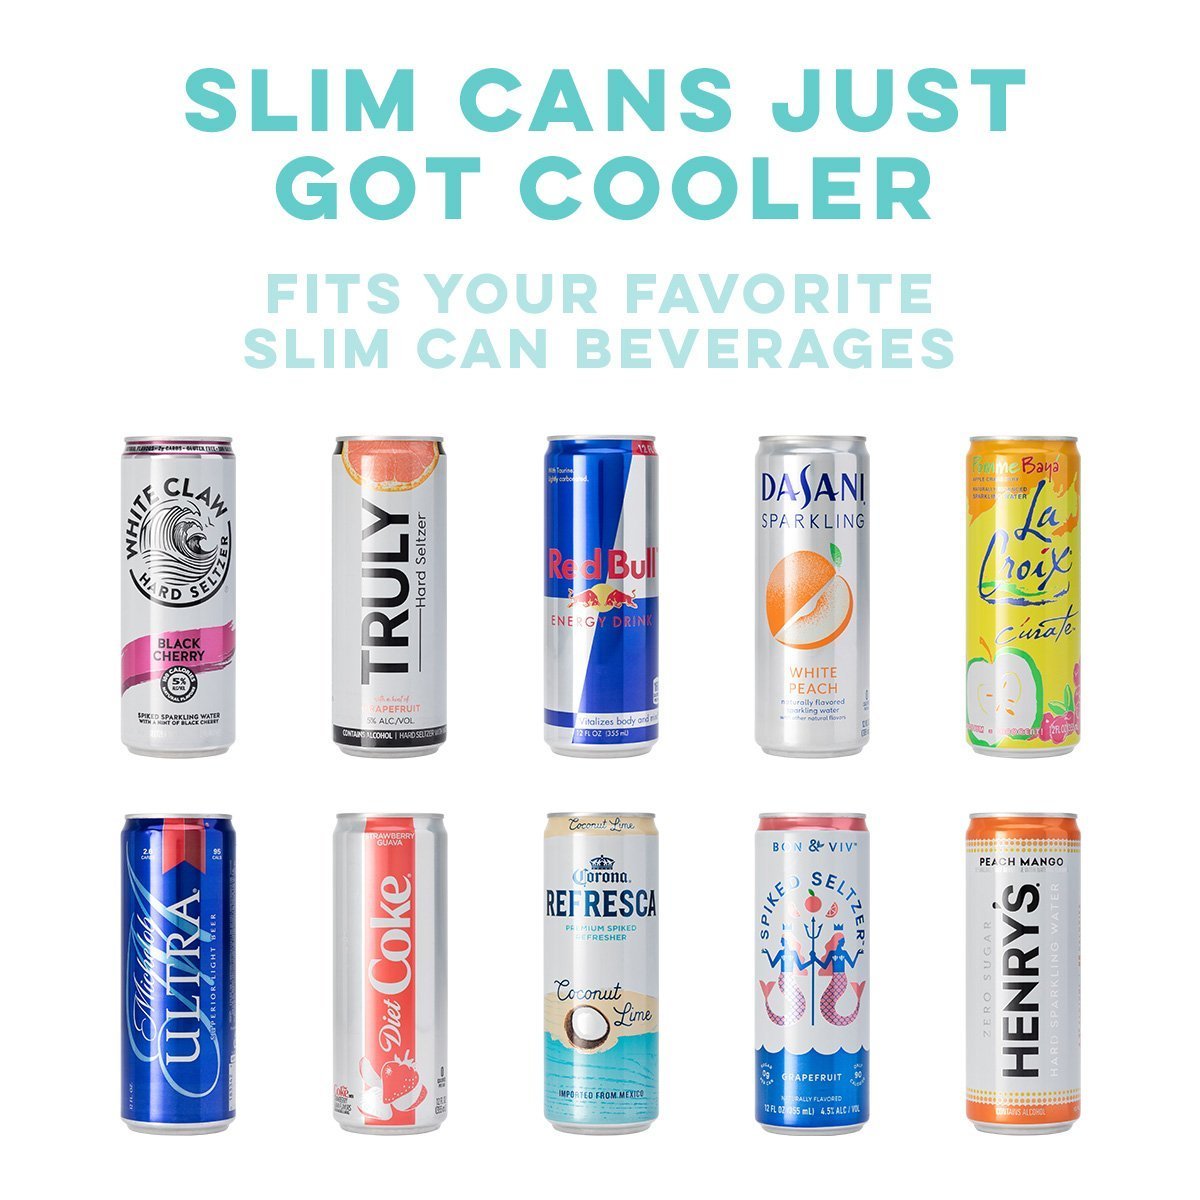 https://callahansgifts.com/wp-content/uploads/2020/12/Slim-Can-Drinks-ISC_20ac618d-fdcc-42ef-bbdd-16810c32c157.jpg